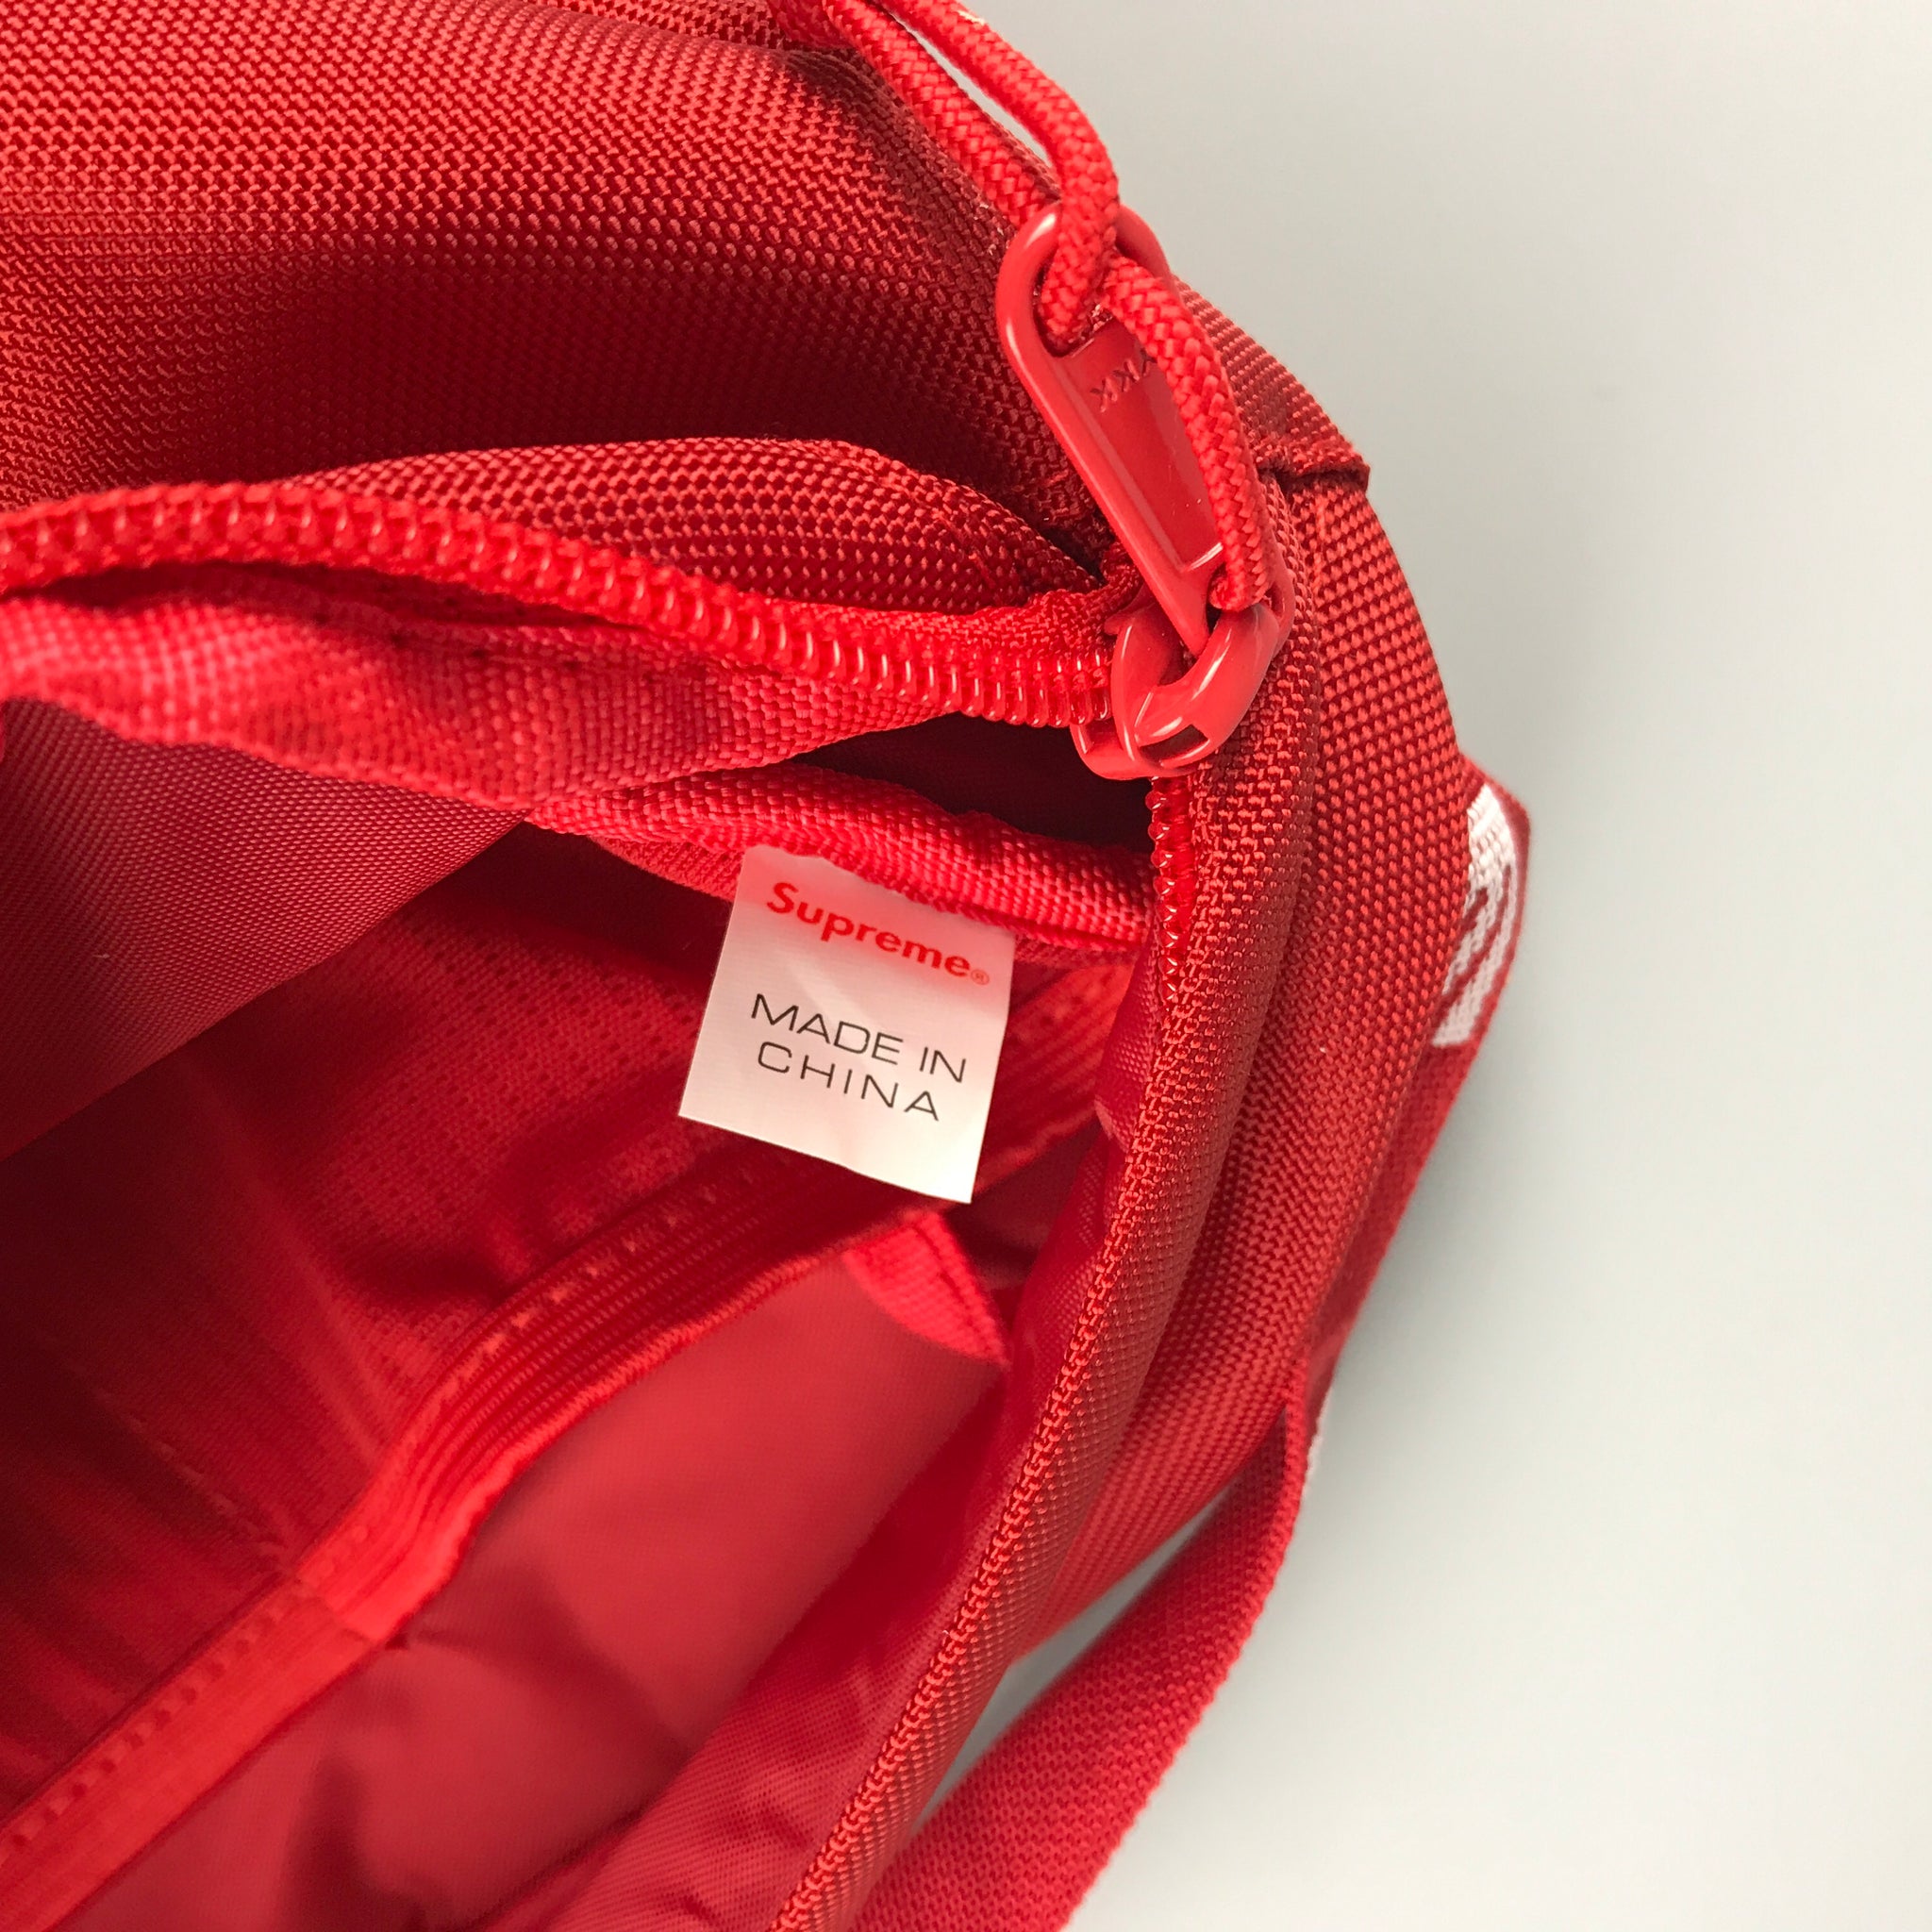 supreme bag made in china | Supreme HypeBeast Product